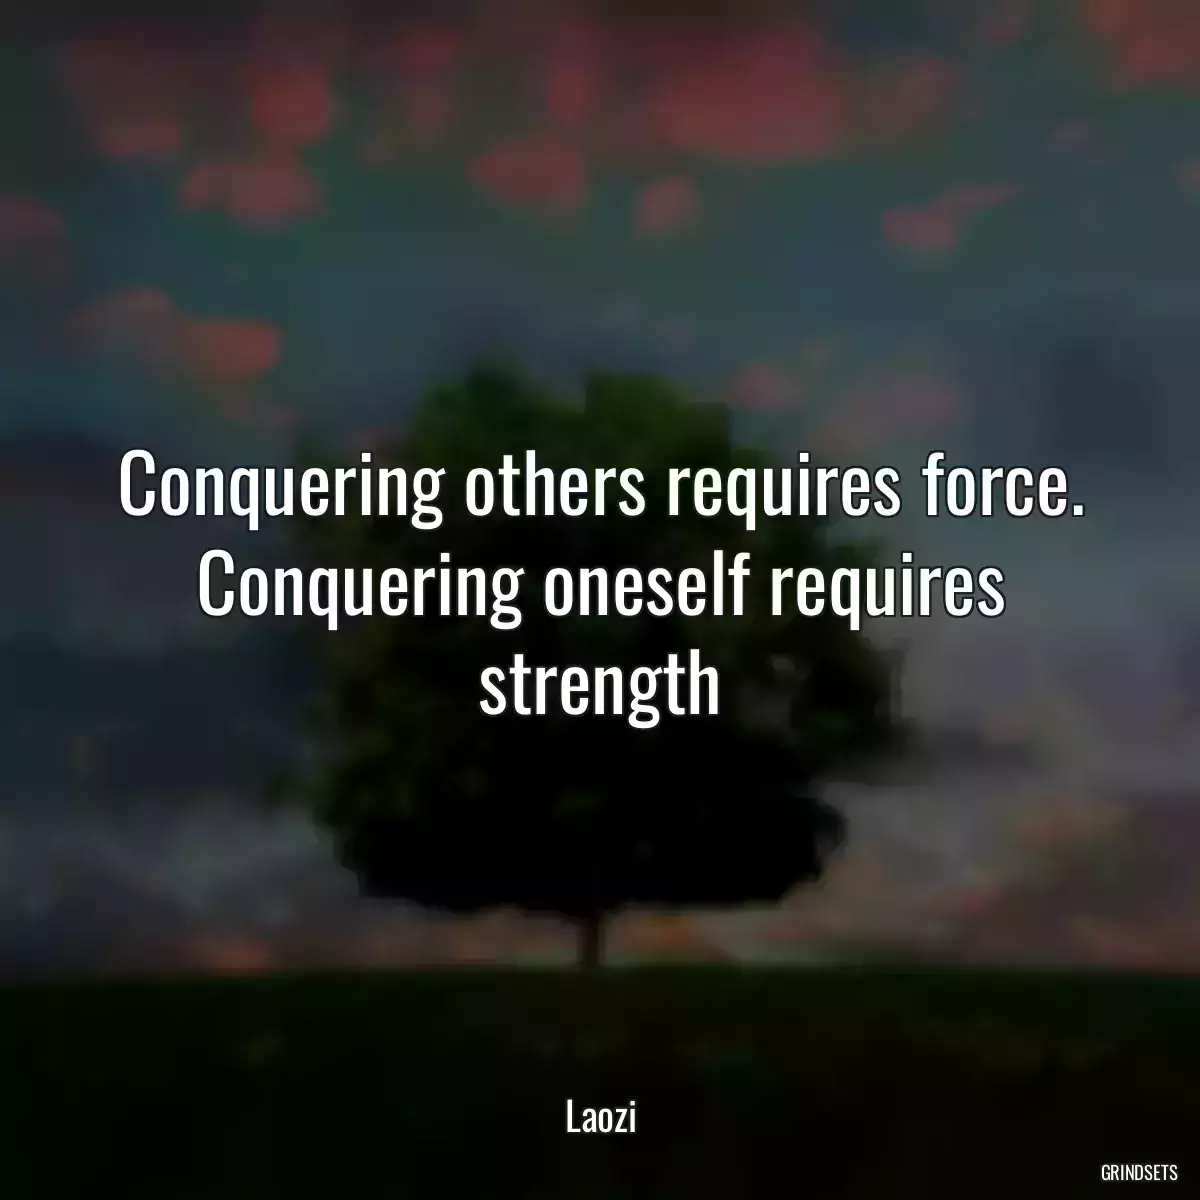 Conquering others requires force. Conquering oneself requires strength